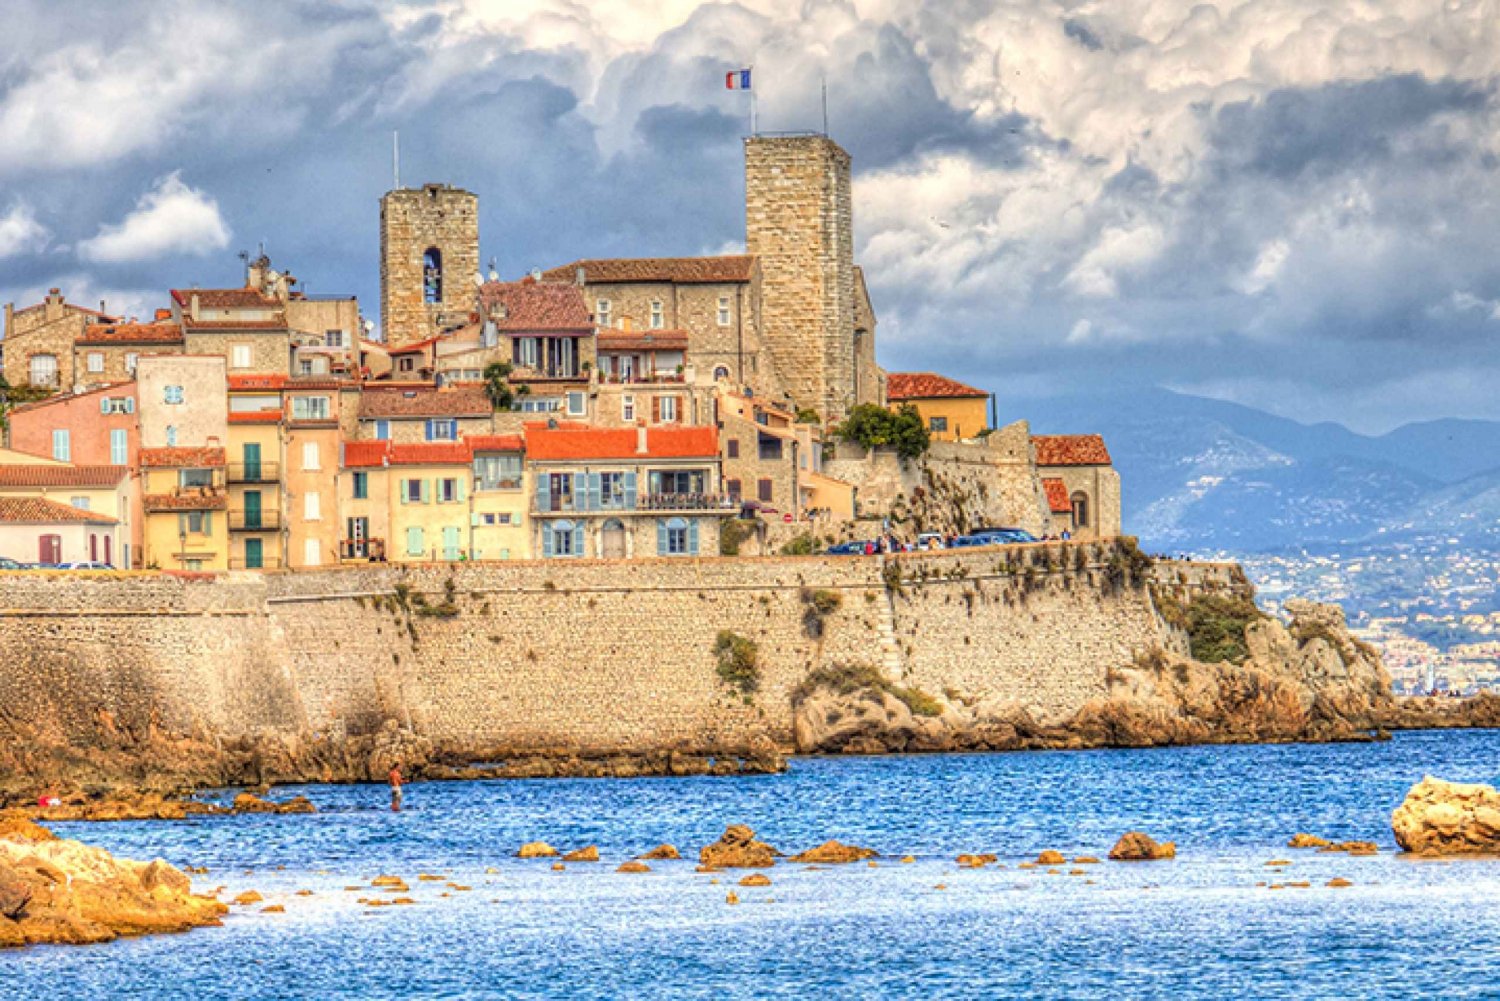 Saint Paul de Vence, Antibes, and Cannes from Nice